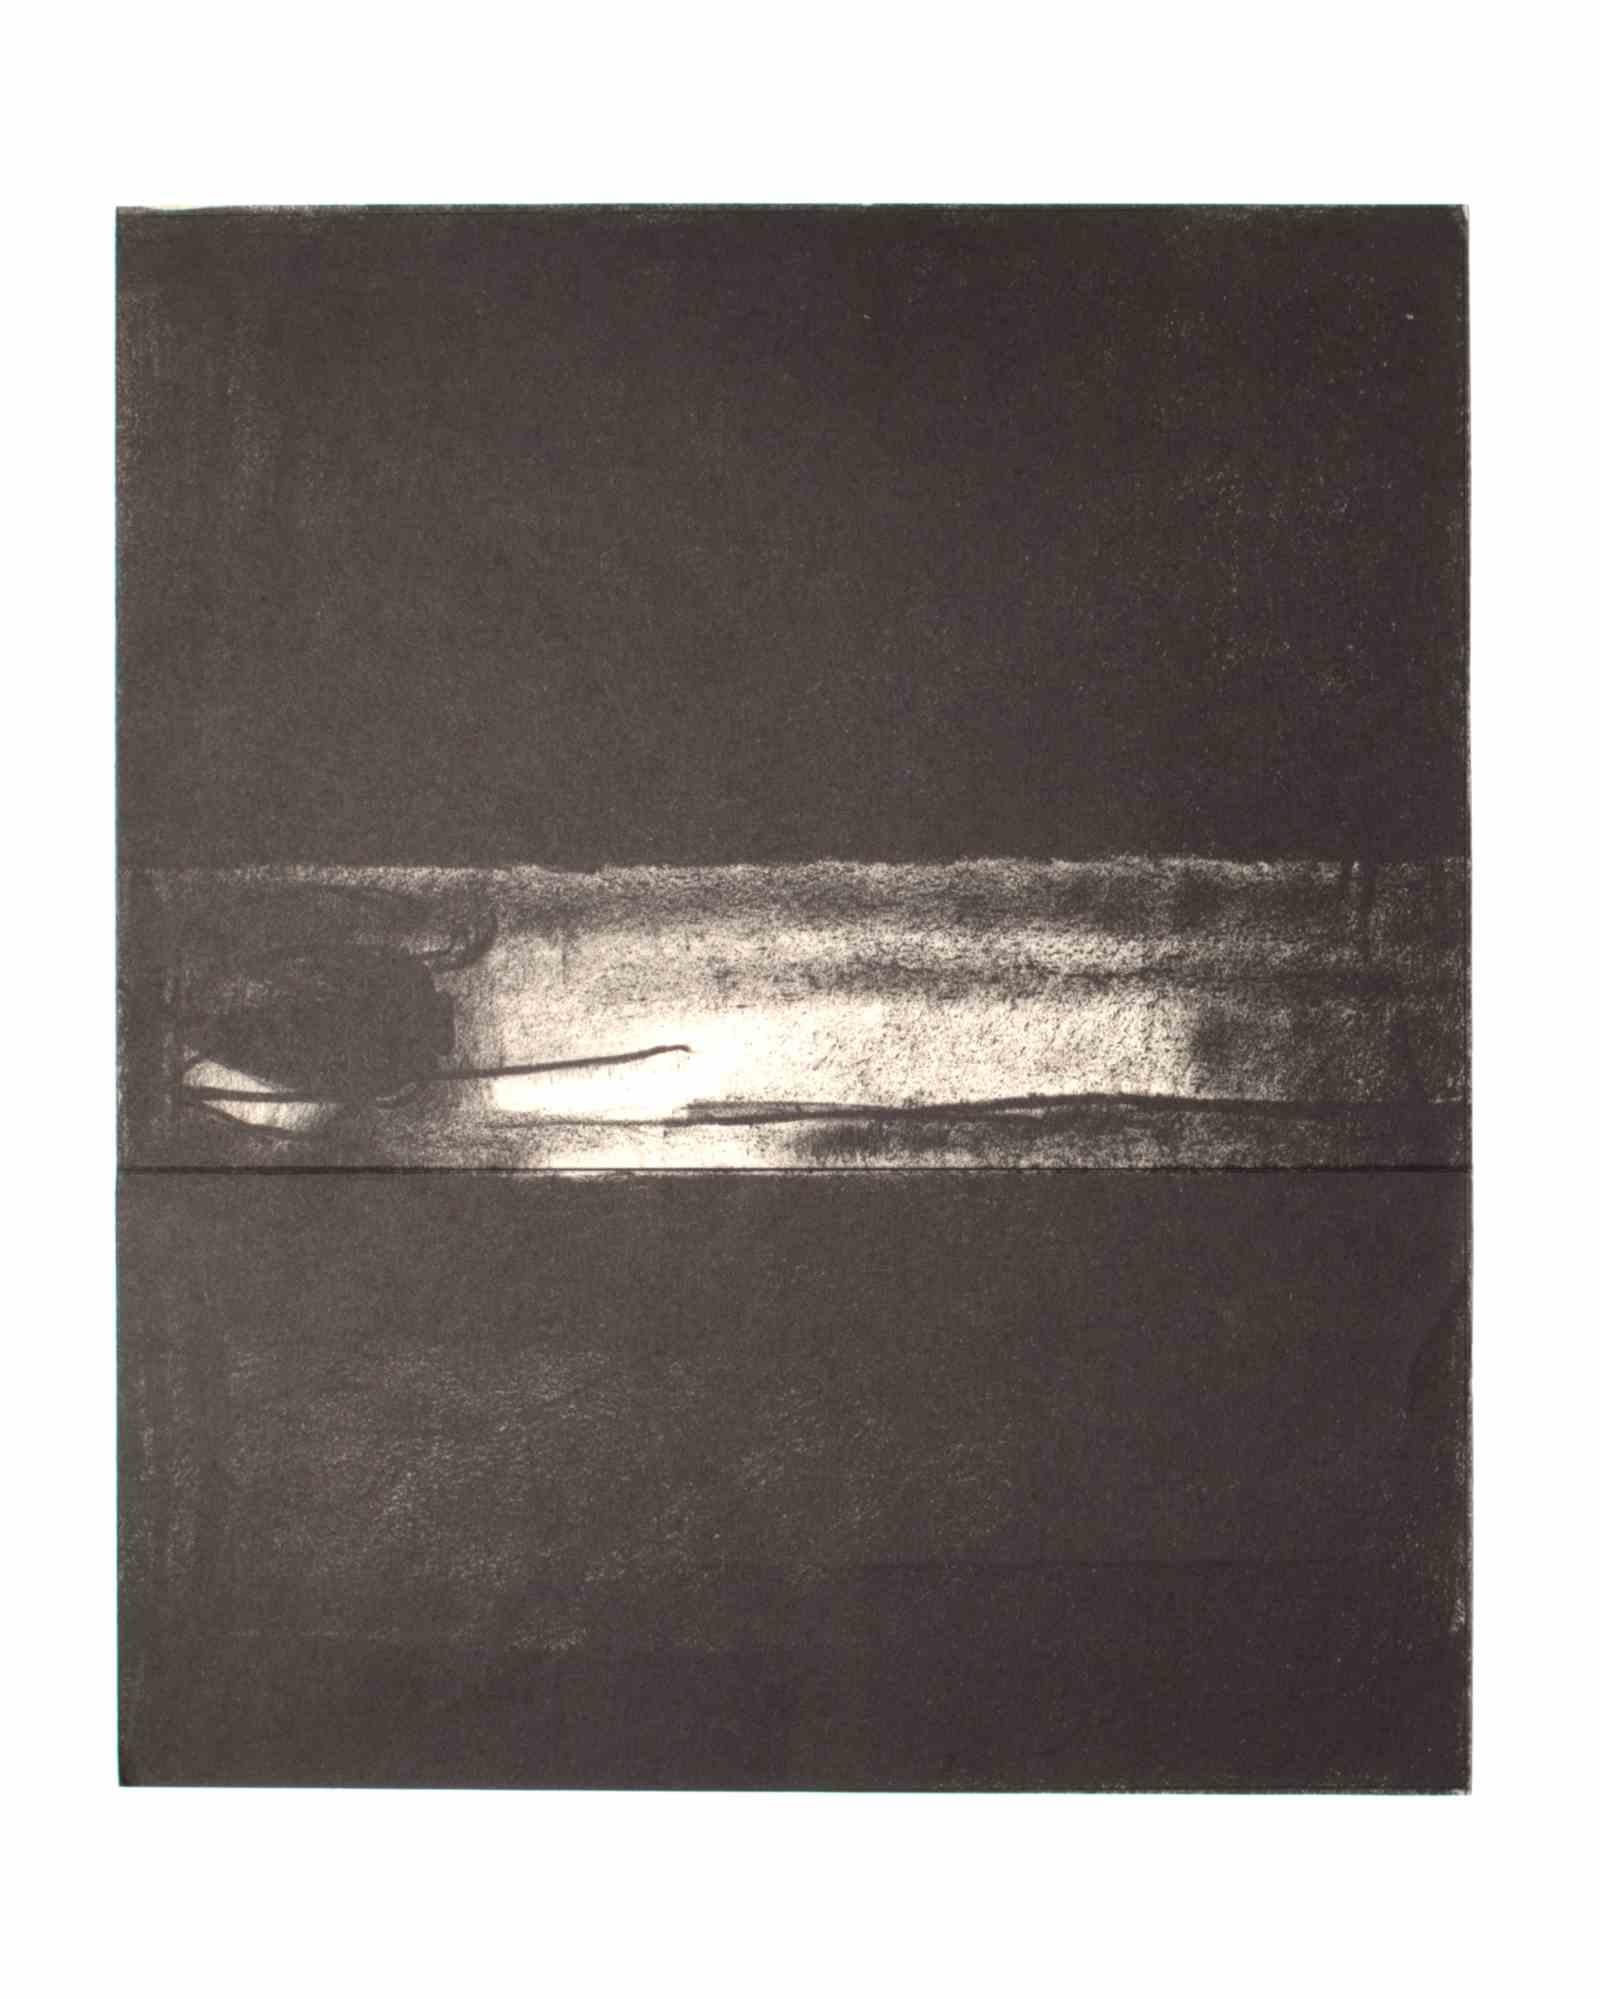 Abstract Composition is a Lithograph realized by Piero Pizzi Cannella in 1985.

Good condition, no signature.

Limited edition of 125 copies.

Piero Pizzi Cannella (born 20 November 1955) is an Italian artist and painter. From the beginning he